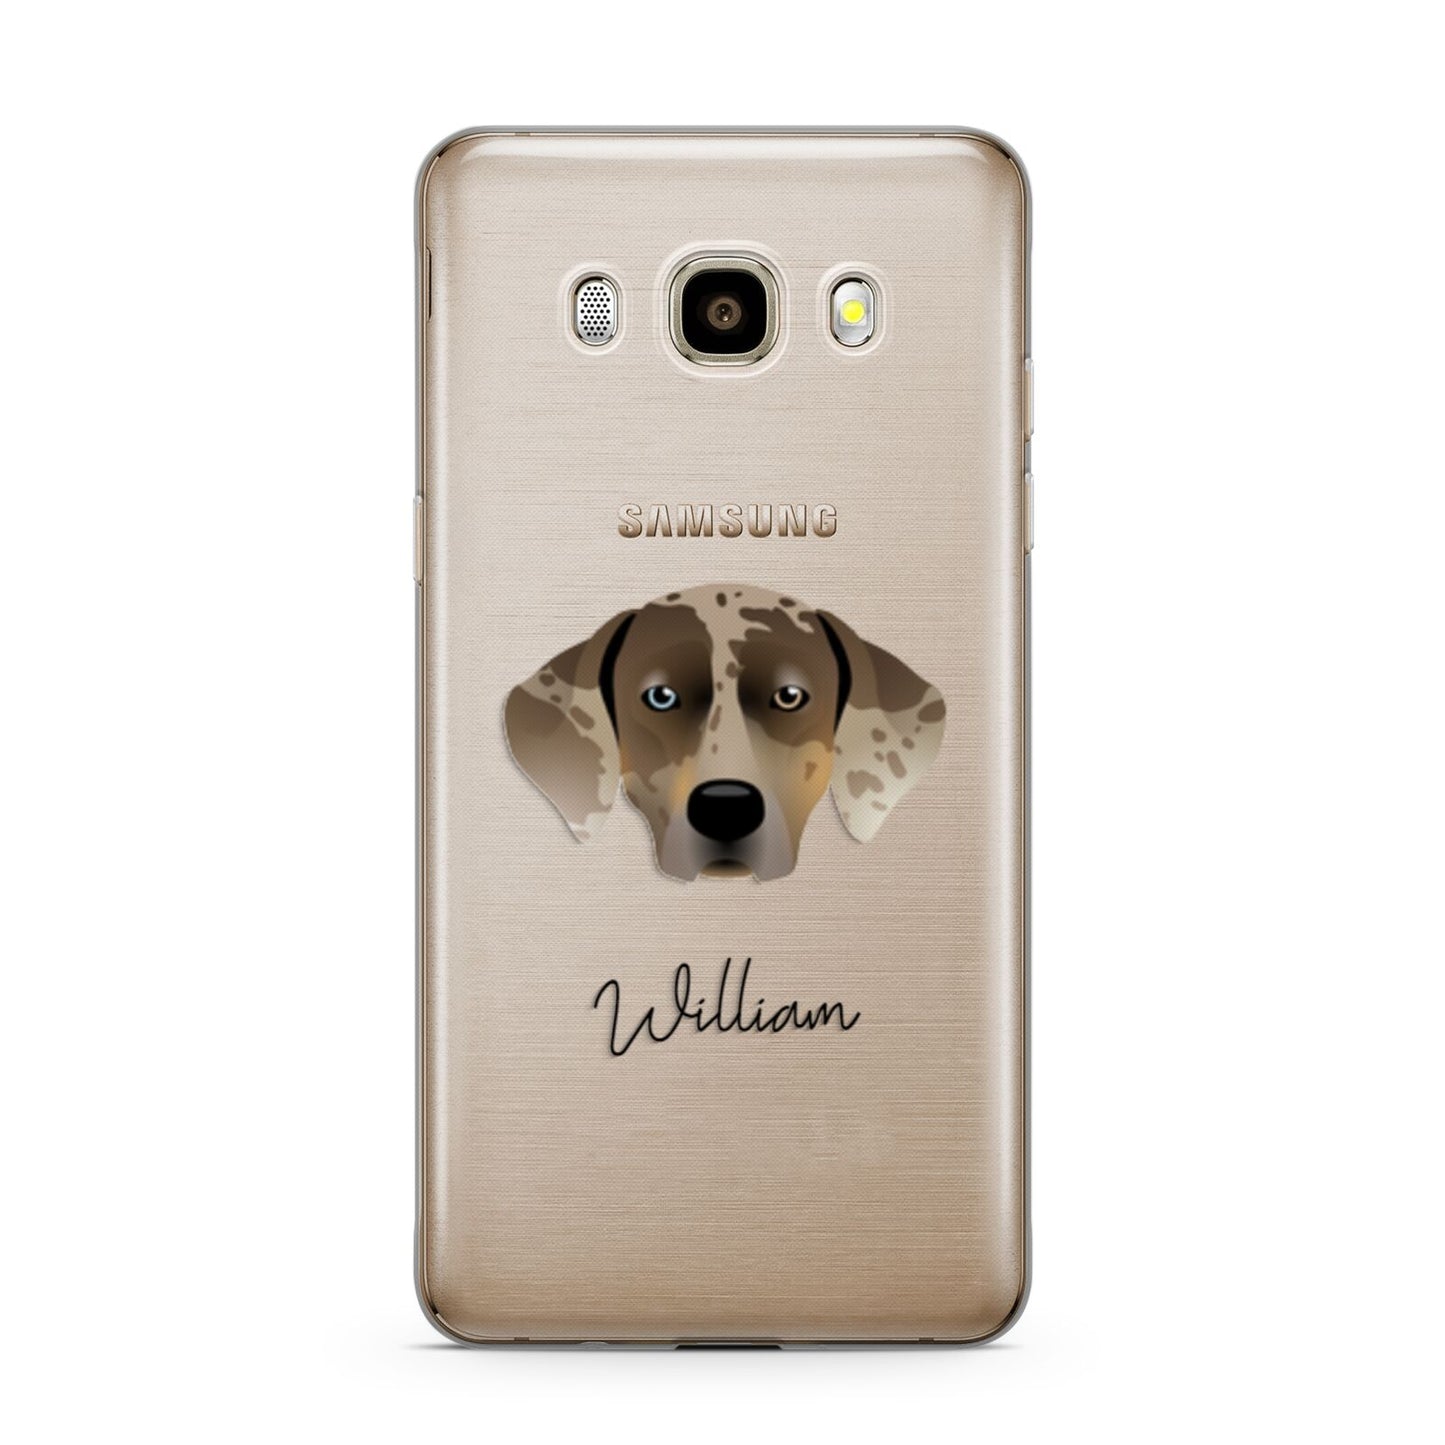 Catahoula Leopard Dog Personalised Samsung Galaxy J7 2016 Case on gold phone